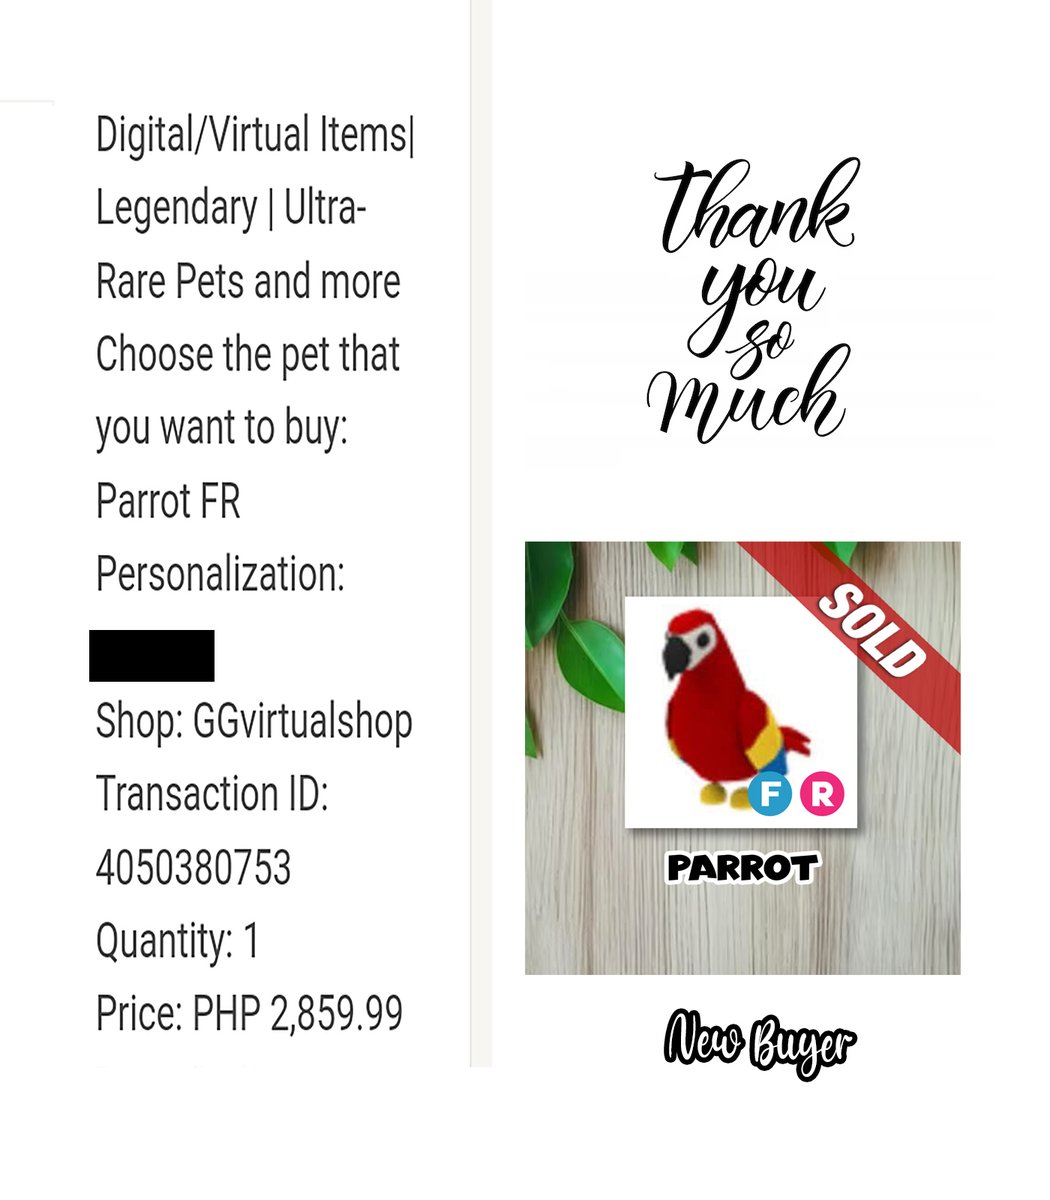 3⃣6⃣ Sold FR Parrot to our NEW BUYER thank you so much for trusting & ordering to our shop😇

#adoptmetrading #AdoptMe #adoptmeoffer #AdoptMePets #adoptmegiveaway #adoptmegw #robloxadoptme #roblox #adoptmeshop #adoptmeseller #trustedshop #adoptmeparrot #legitshop #ggvirtualshop